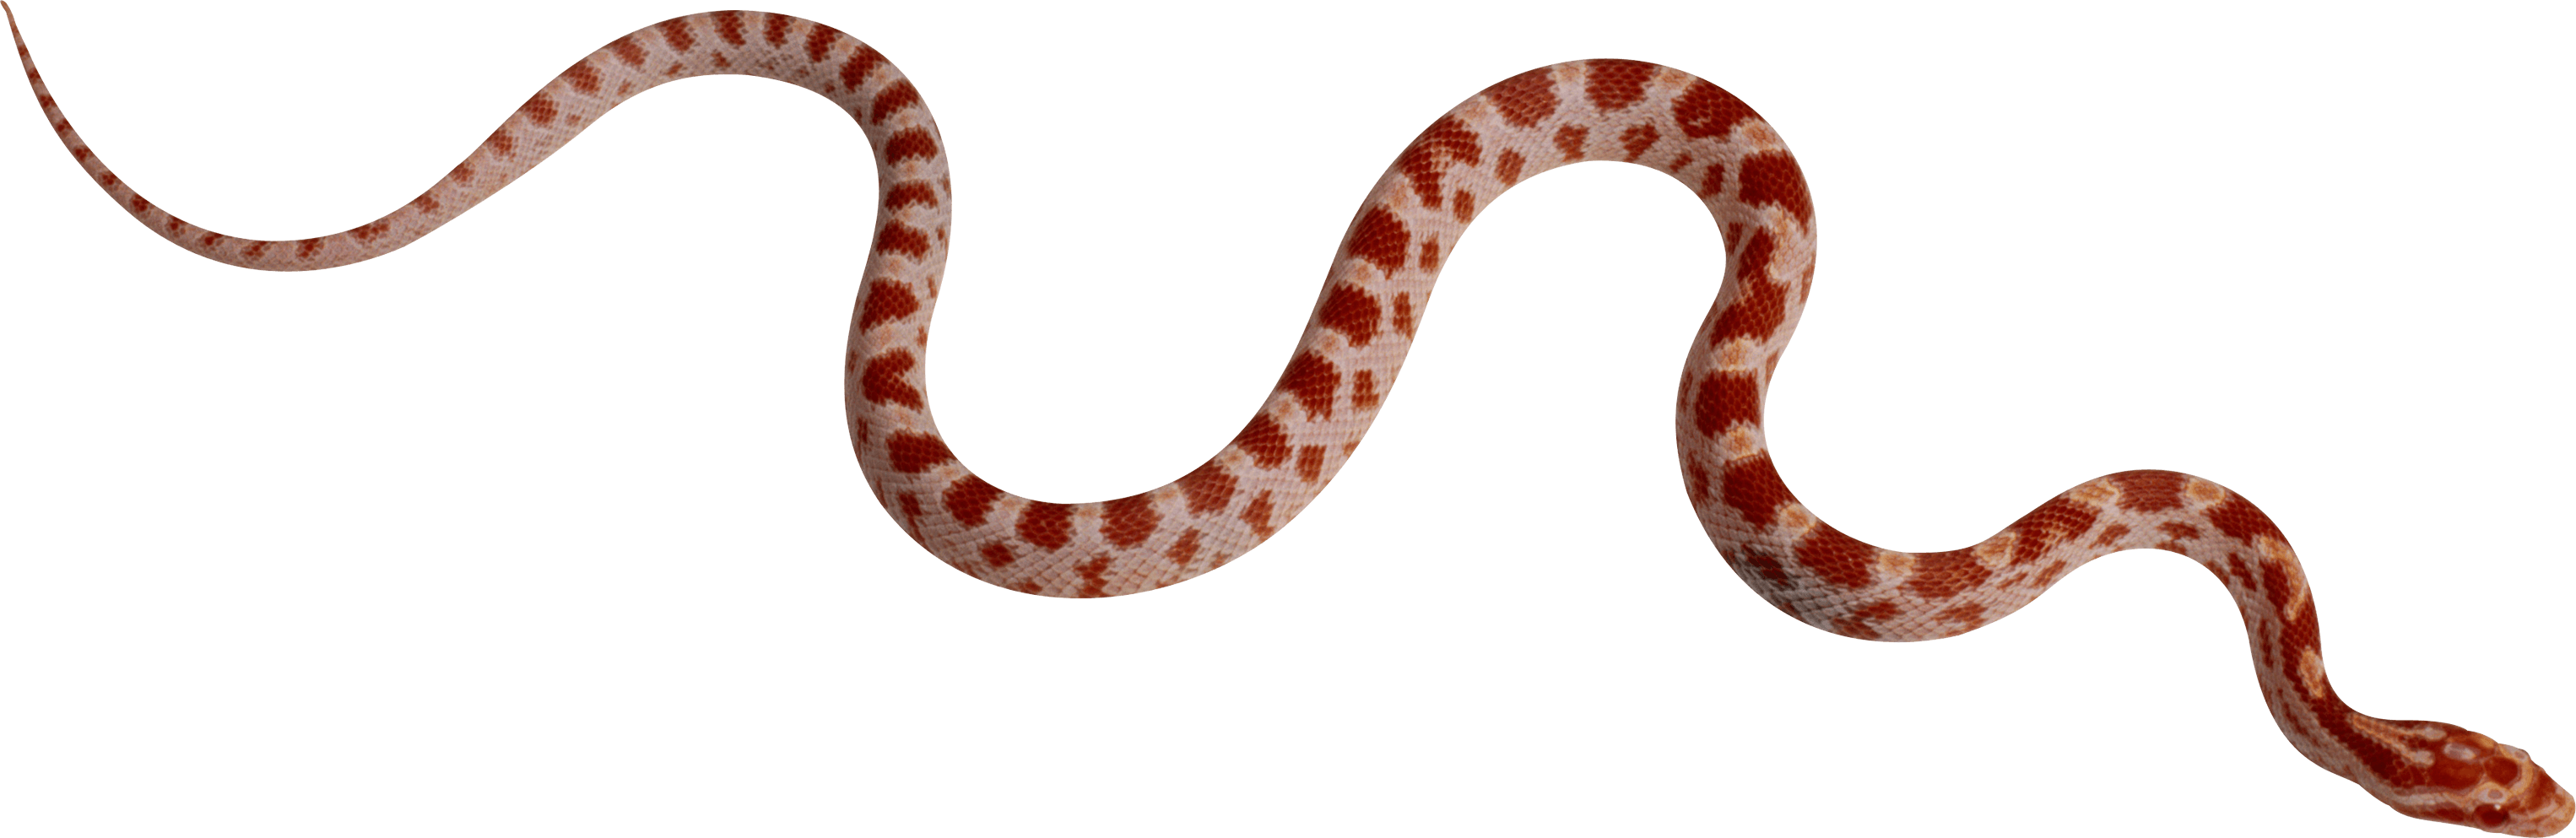 Snake Png Image Picture Download PNG Image, Snake PNG - Free PNG